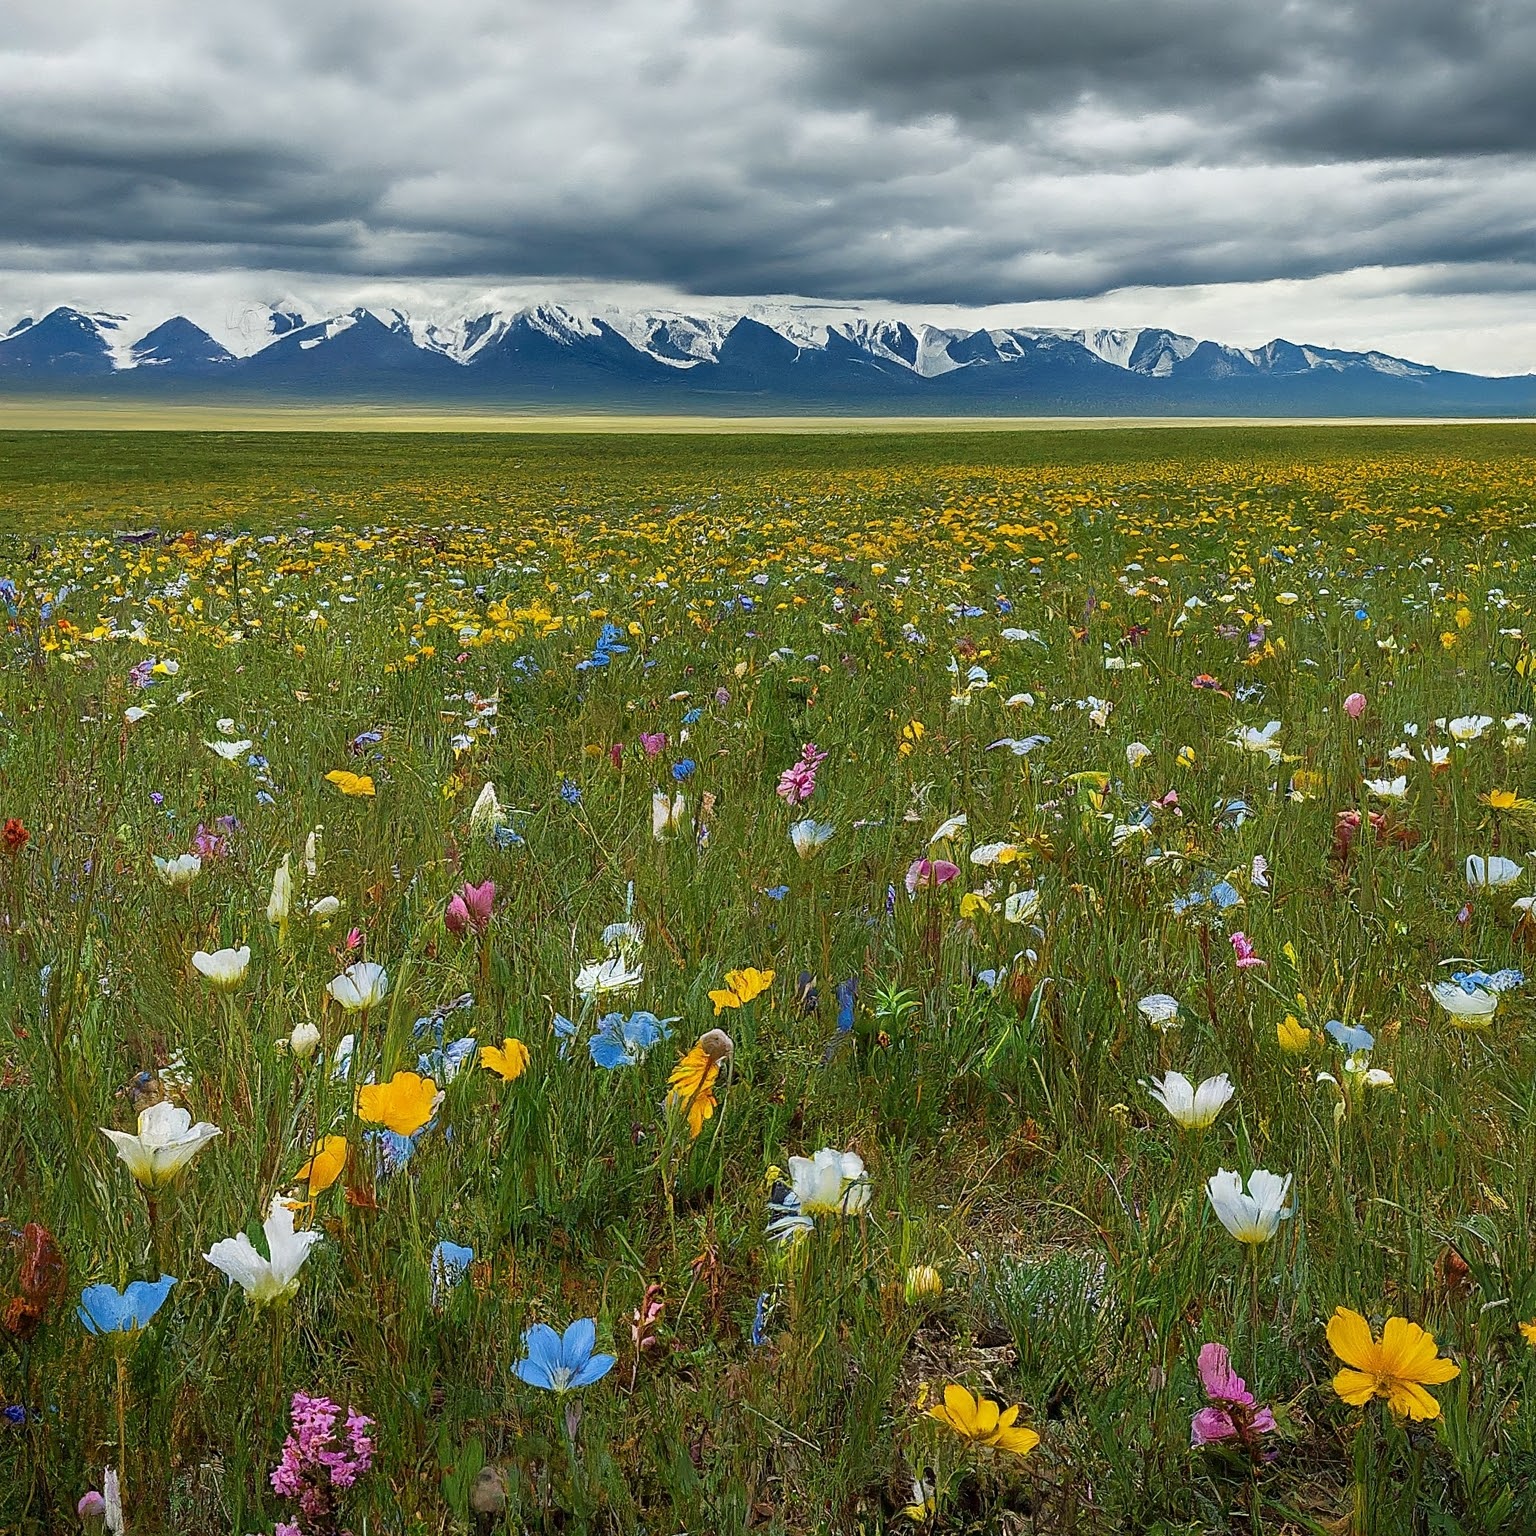 Lush green meadow with wildflowers in Khorgo Terkhiin Tsagaan Nuur National Park, Mongolia, with Khangai Mountains in the distance.